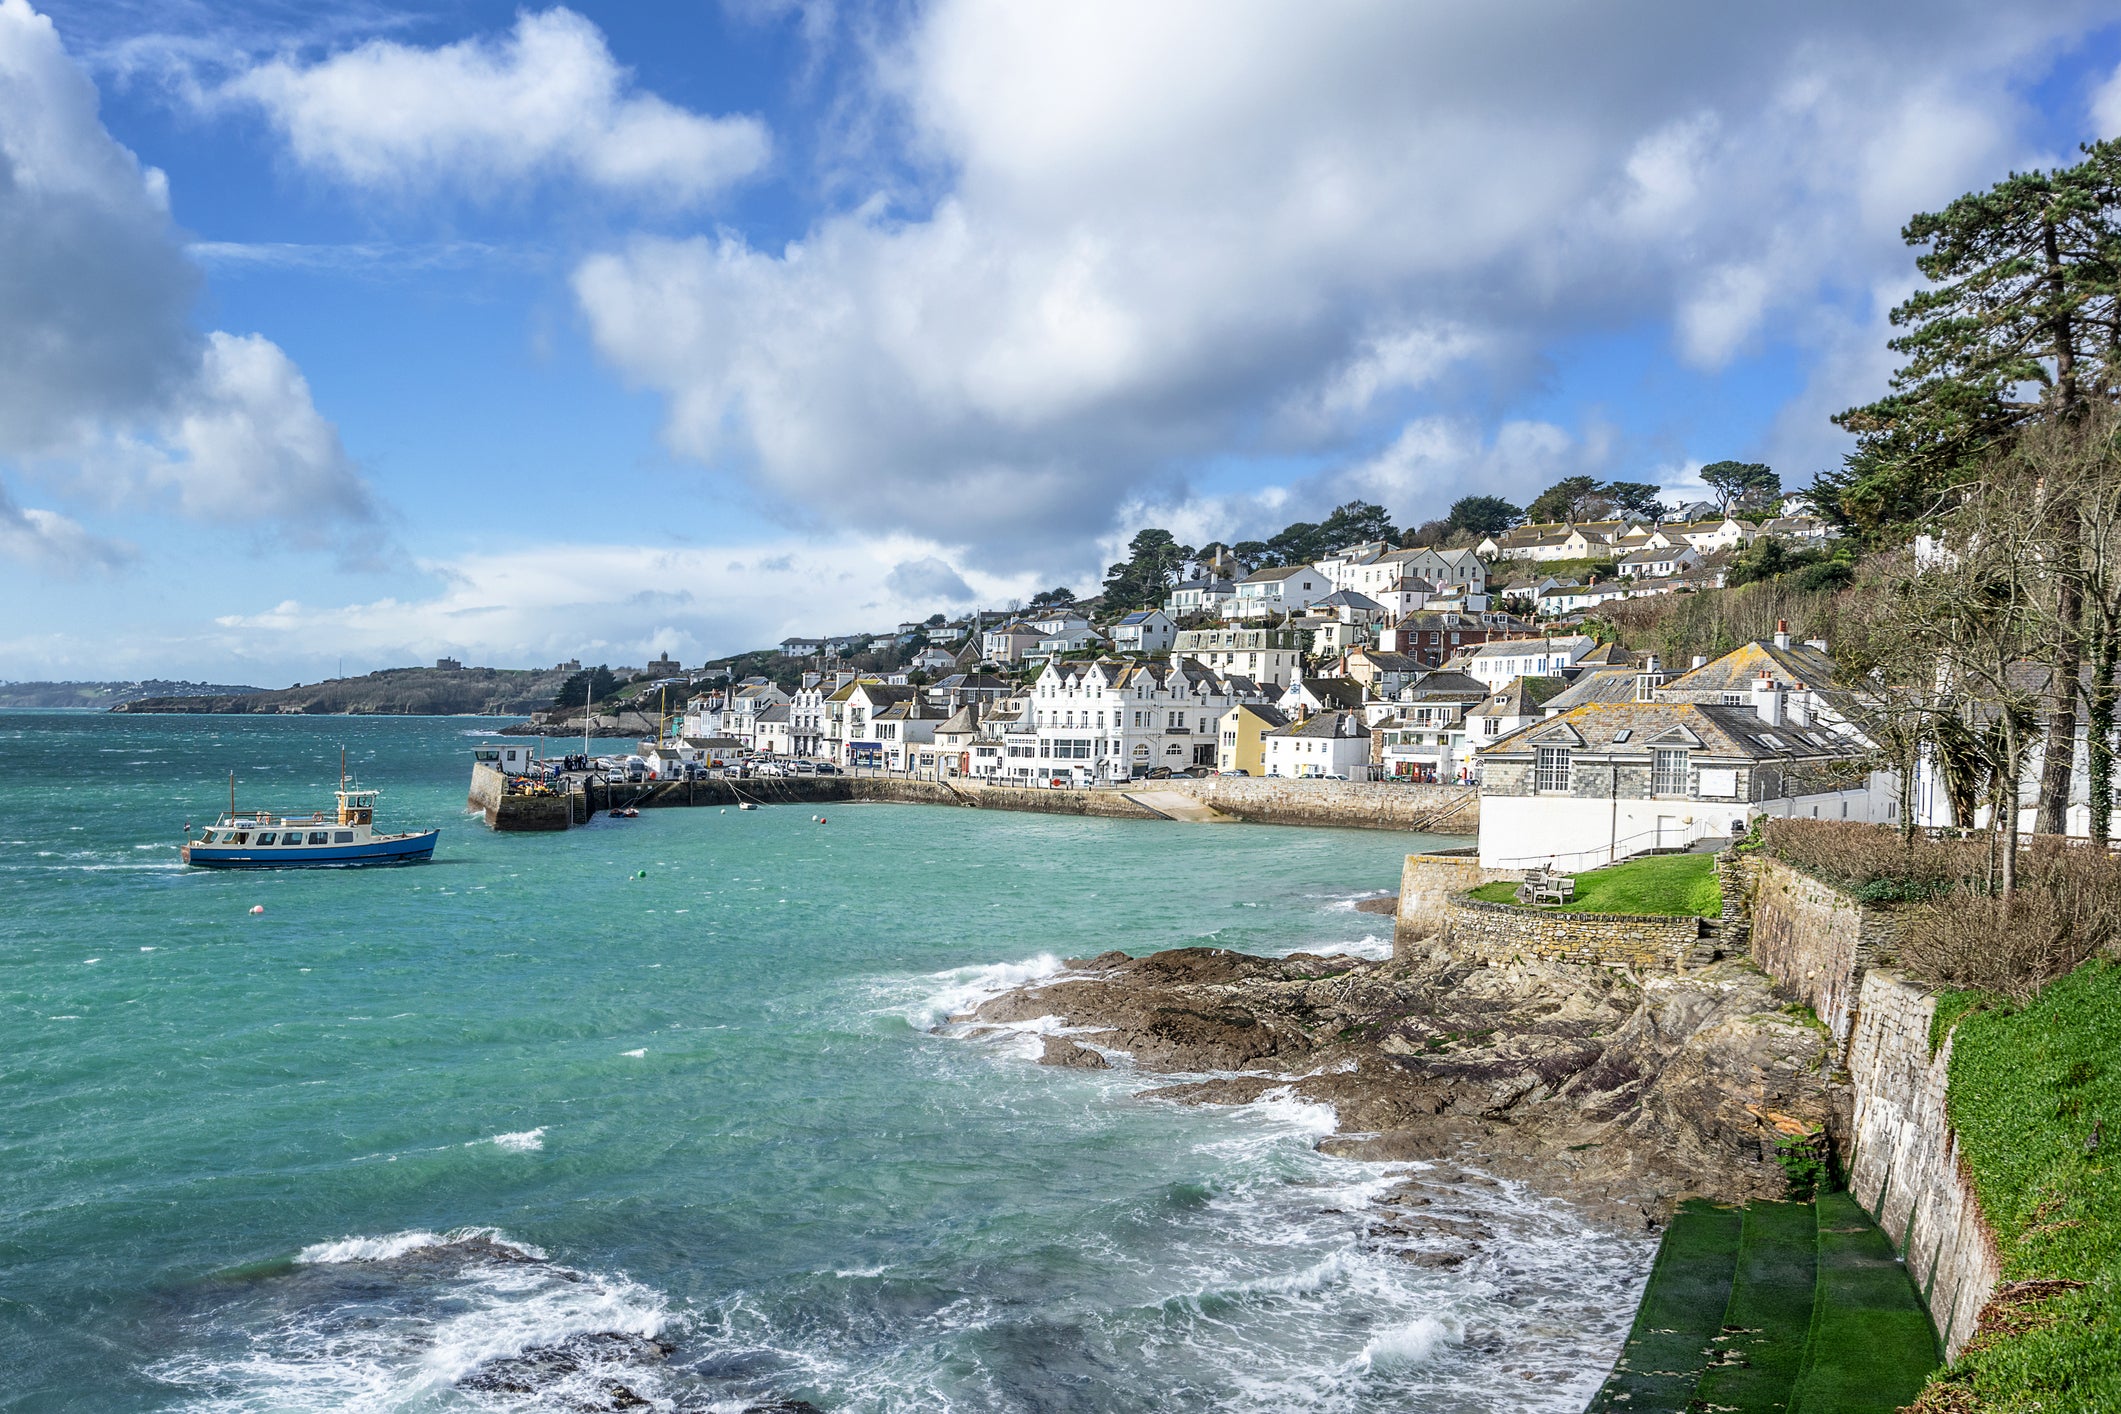 St Mawes is home to several luxurious places to stay in Cornwall